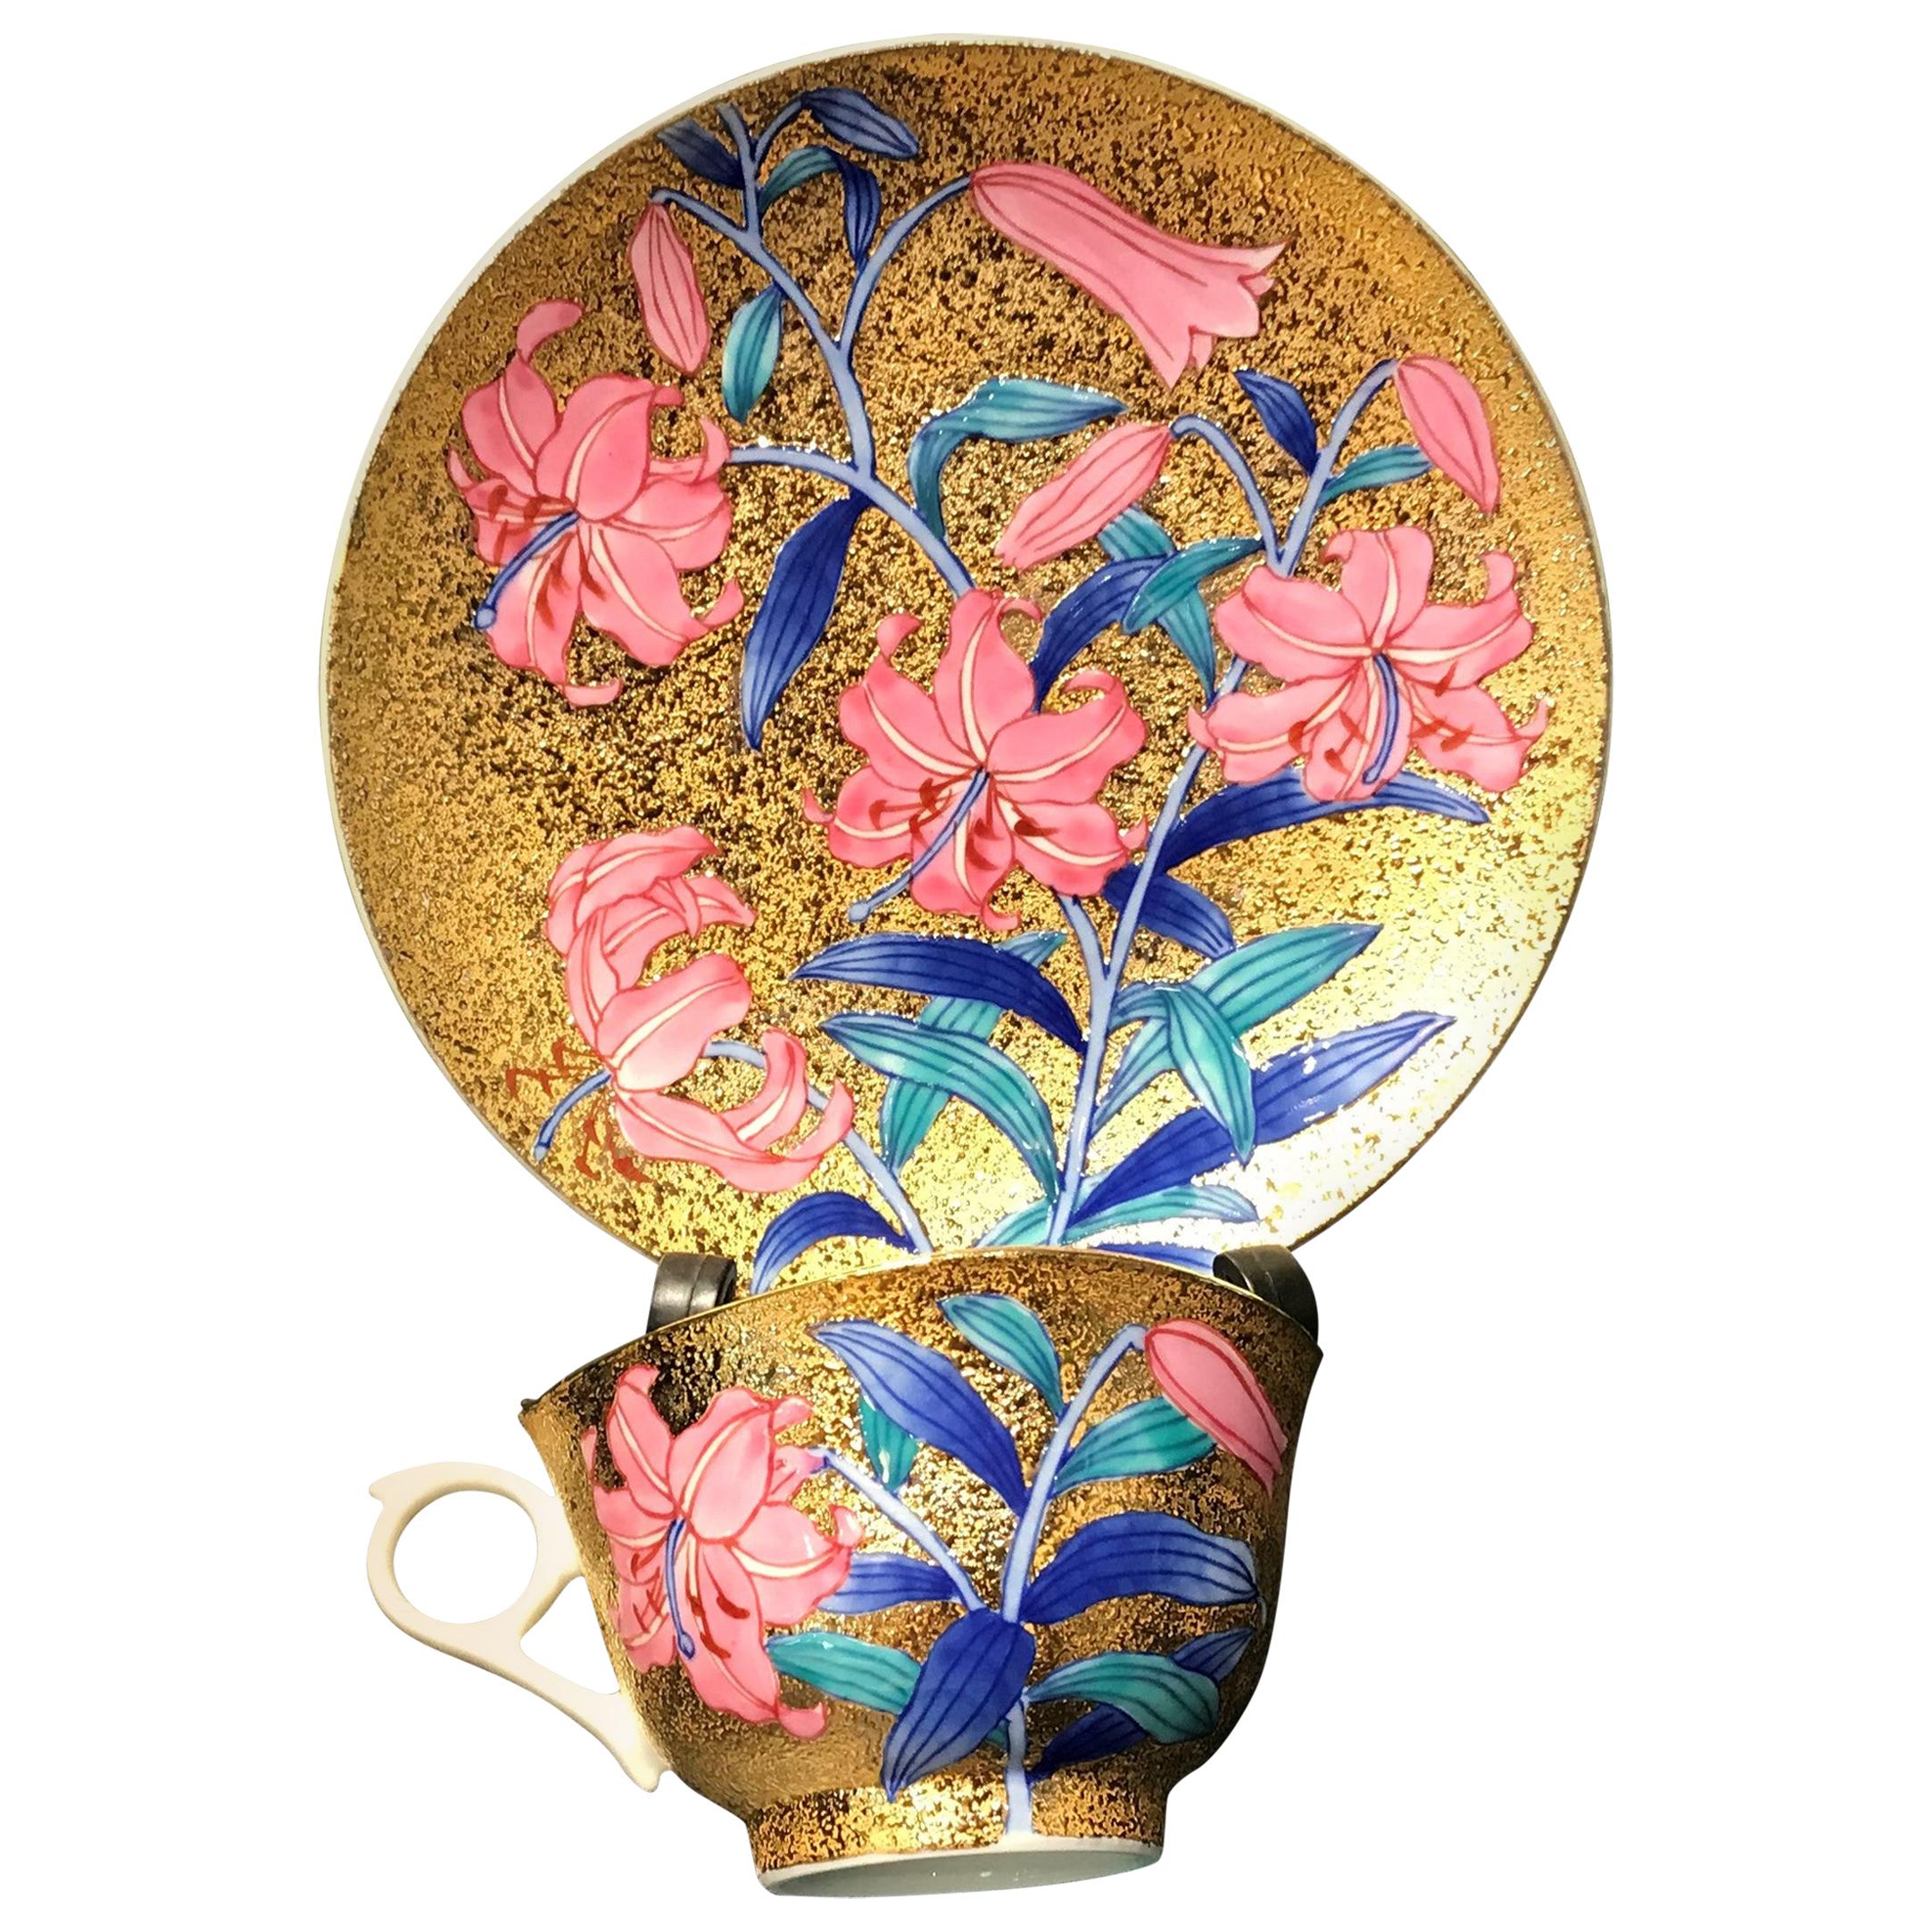 Blue Gold Pink Porcelain Cup and Saucer by Japanese Contemporary Master Artist